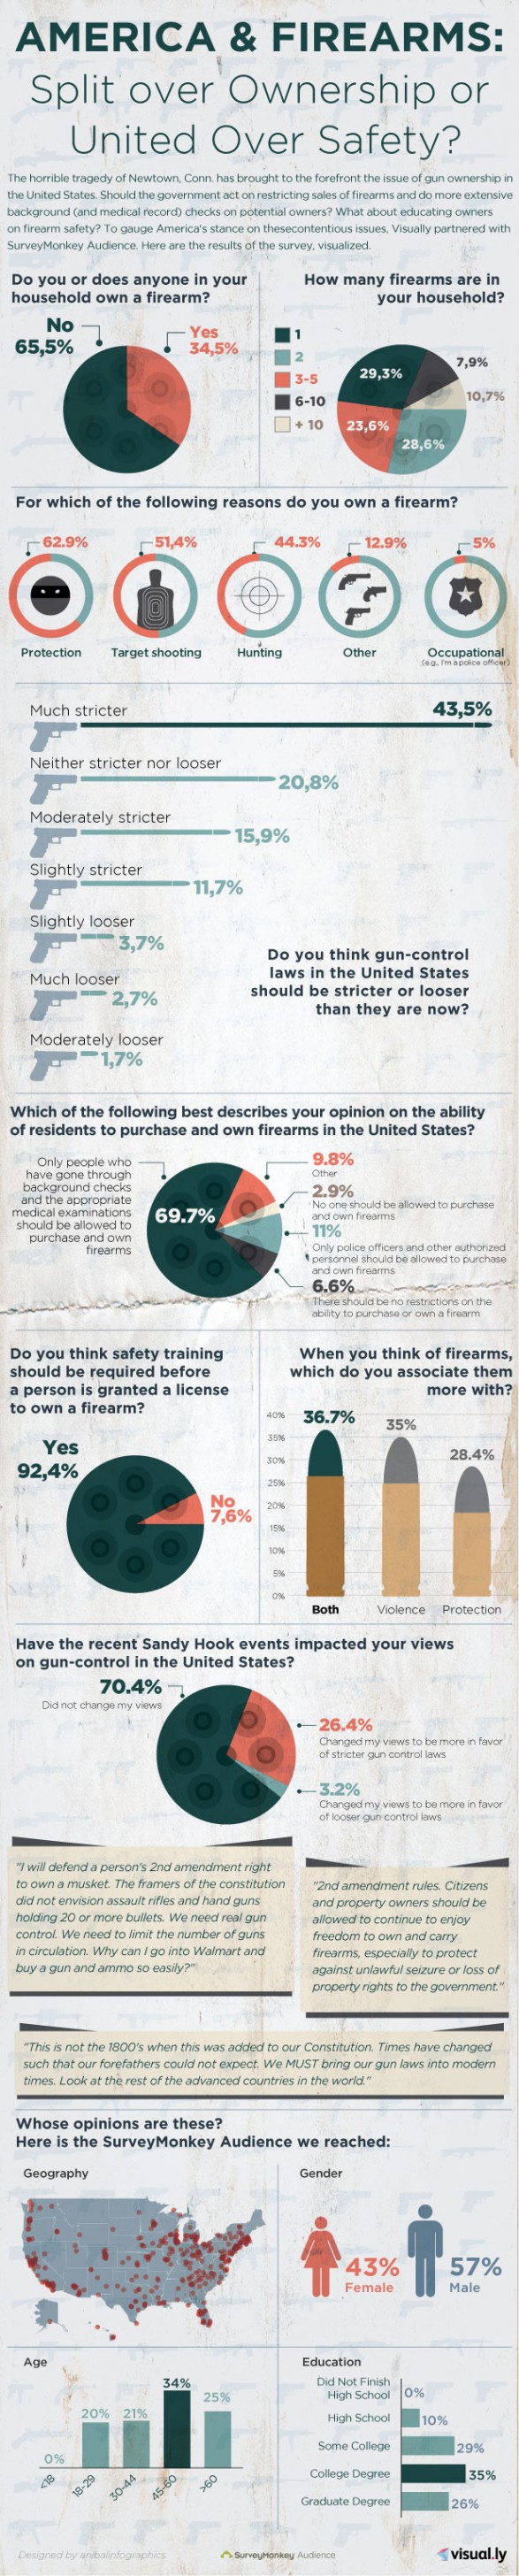 America & Firearms: Split over Ownership or United Over Safety?